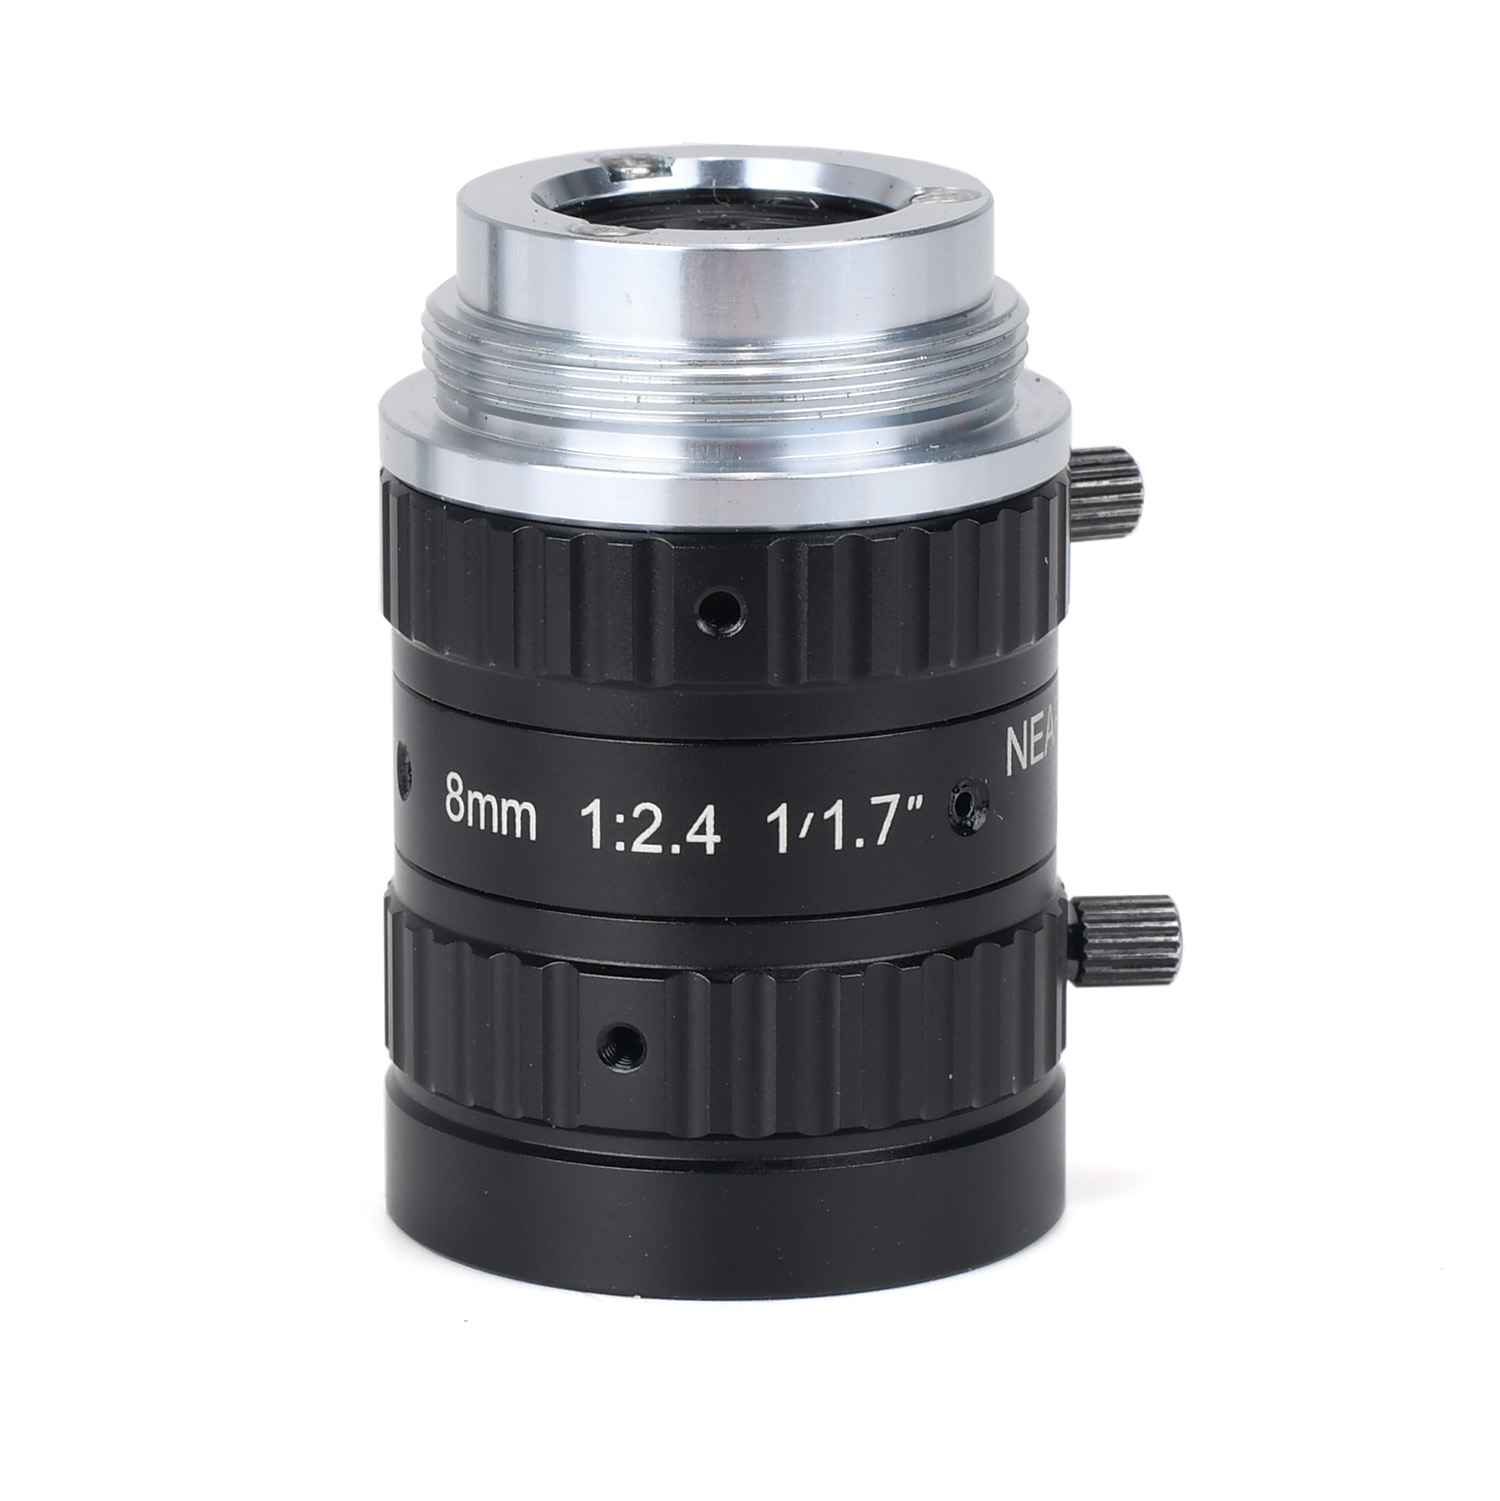 High Definition FA 8mm 1/1.7" Machine Vision Lens Without Distortion Professional C-Mouth Industrial Camera lens